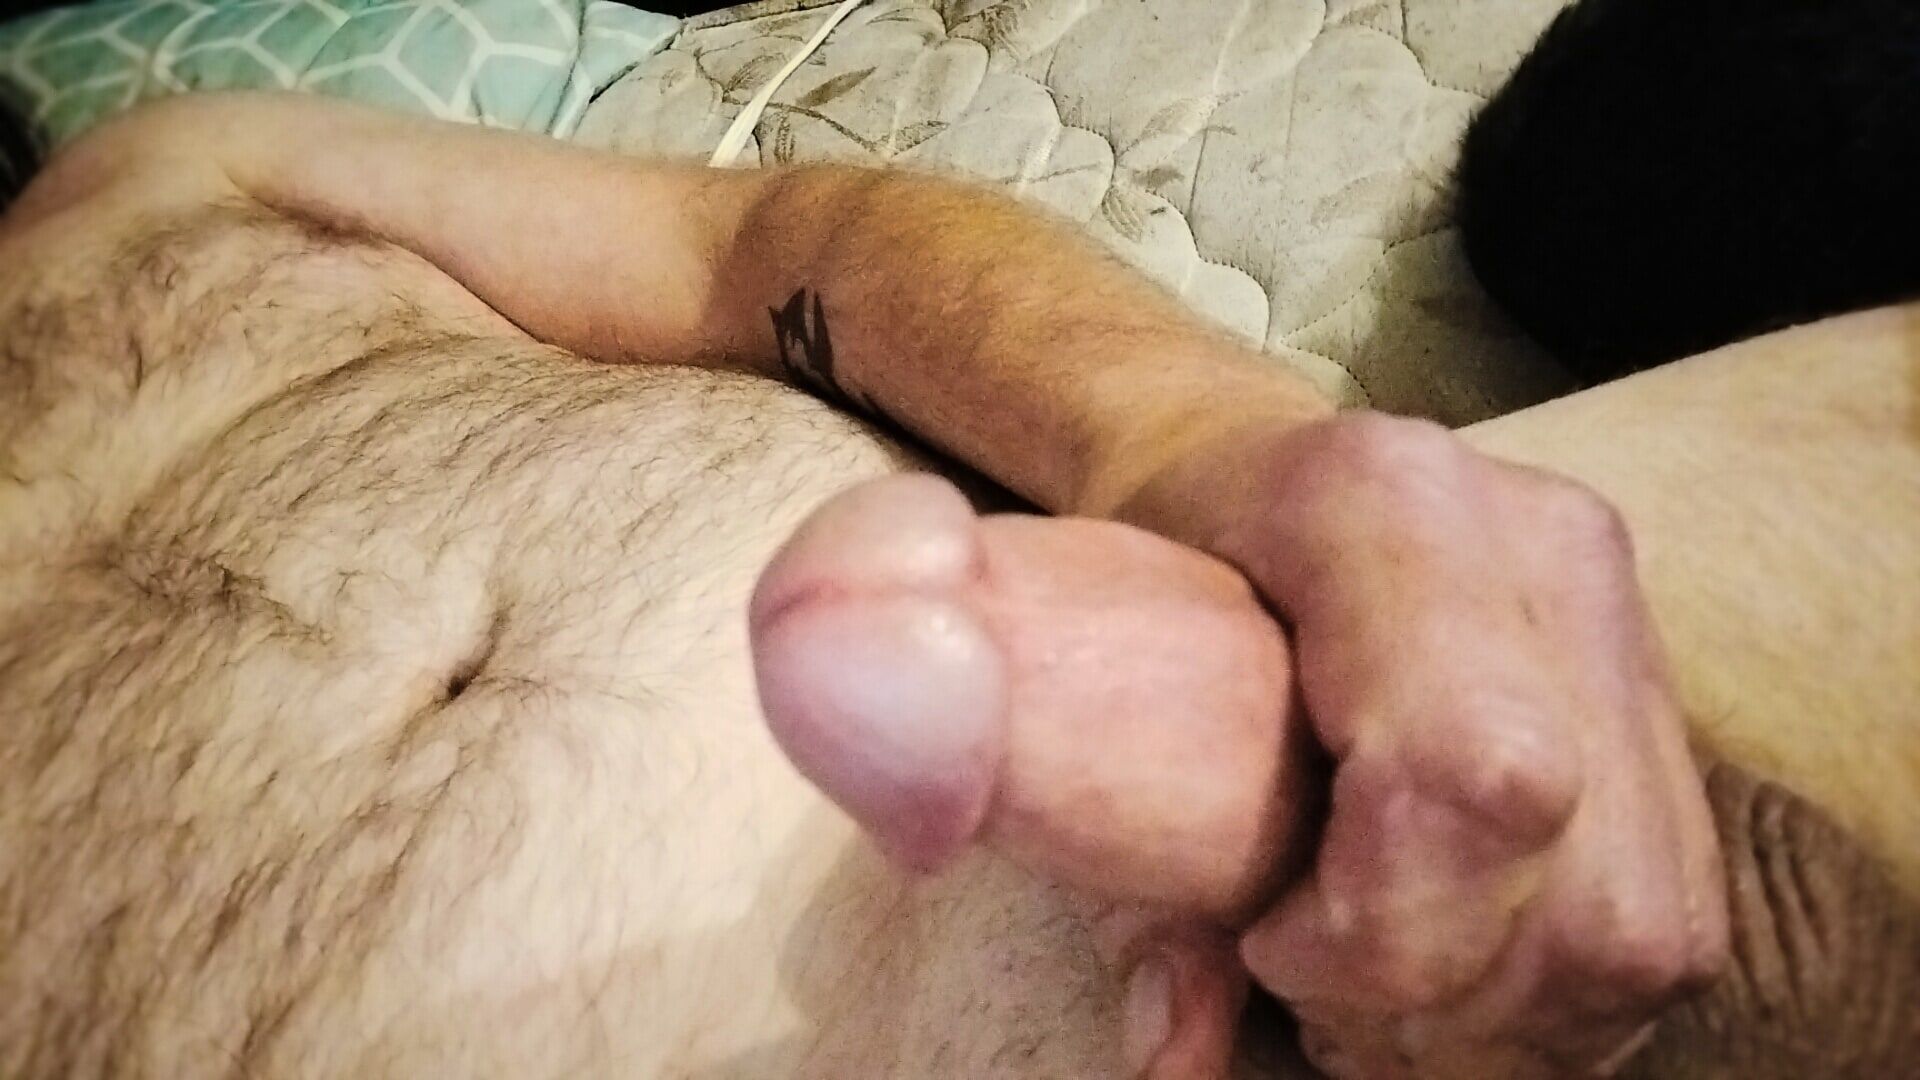 My spun self and I want any and all cocks! #16